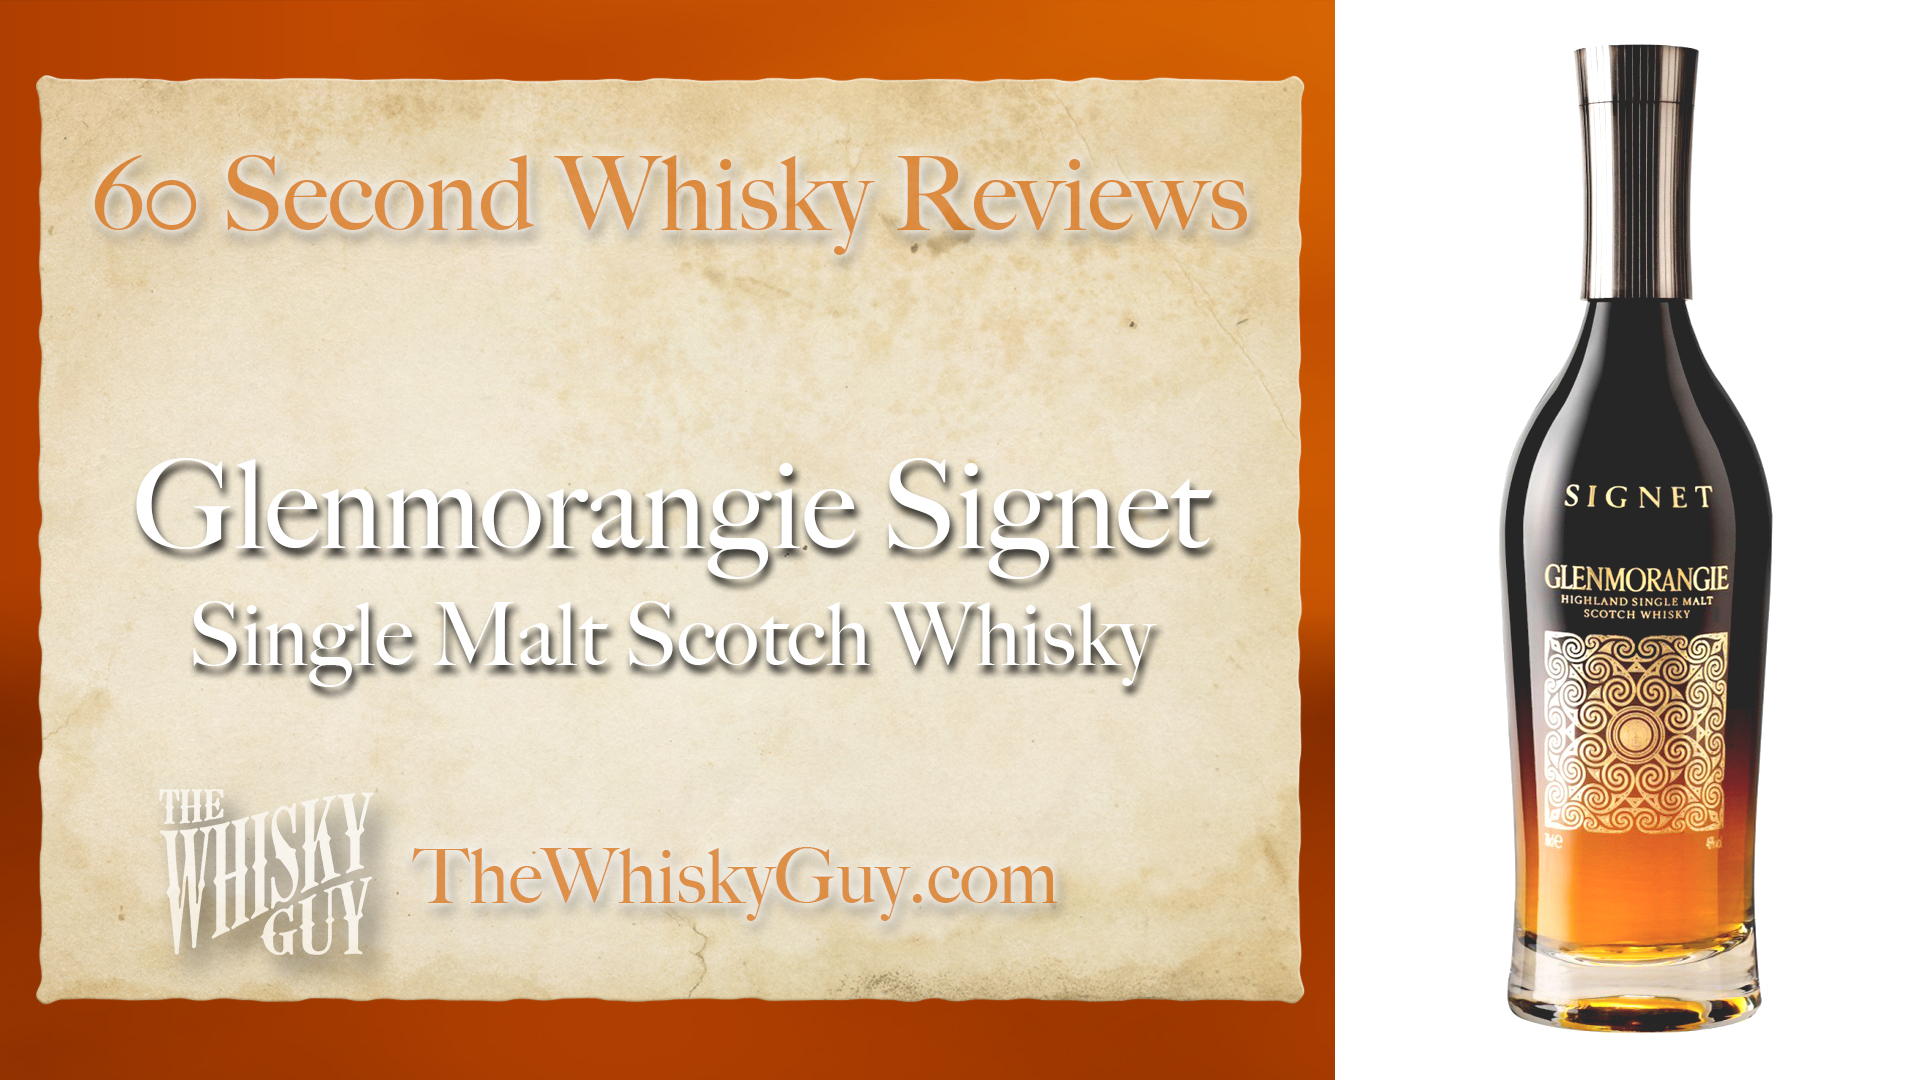 Does Glenmorangie Signet Single Malt Scotch Whisky belong in your liquor cabinet? Is it worth the price at the bar? Give The Whisky Guy 60 seconds and find out! In just 60 seconds, The Whisky Guy reviews Irish Whiskey, Scotch Whisky, Single Malt, Canadian Whisky, Bourbon Whiskey, Japanese Whisky and other whiskies from around the world. Find more at TheWhiskyGuy.com. All original content © Ari Shapiro - TheWhiskyGuy.com